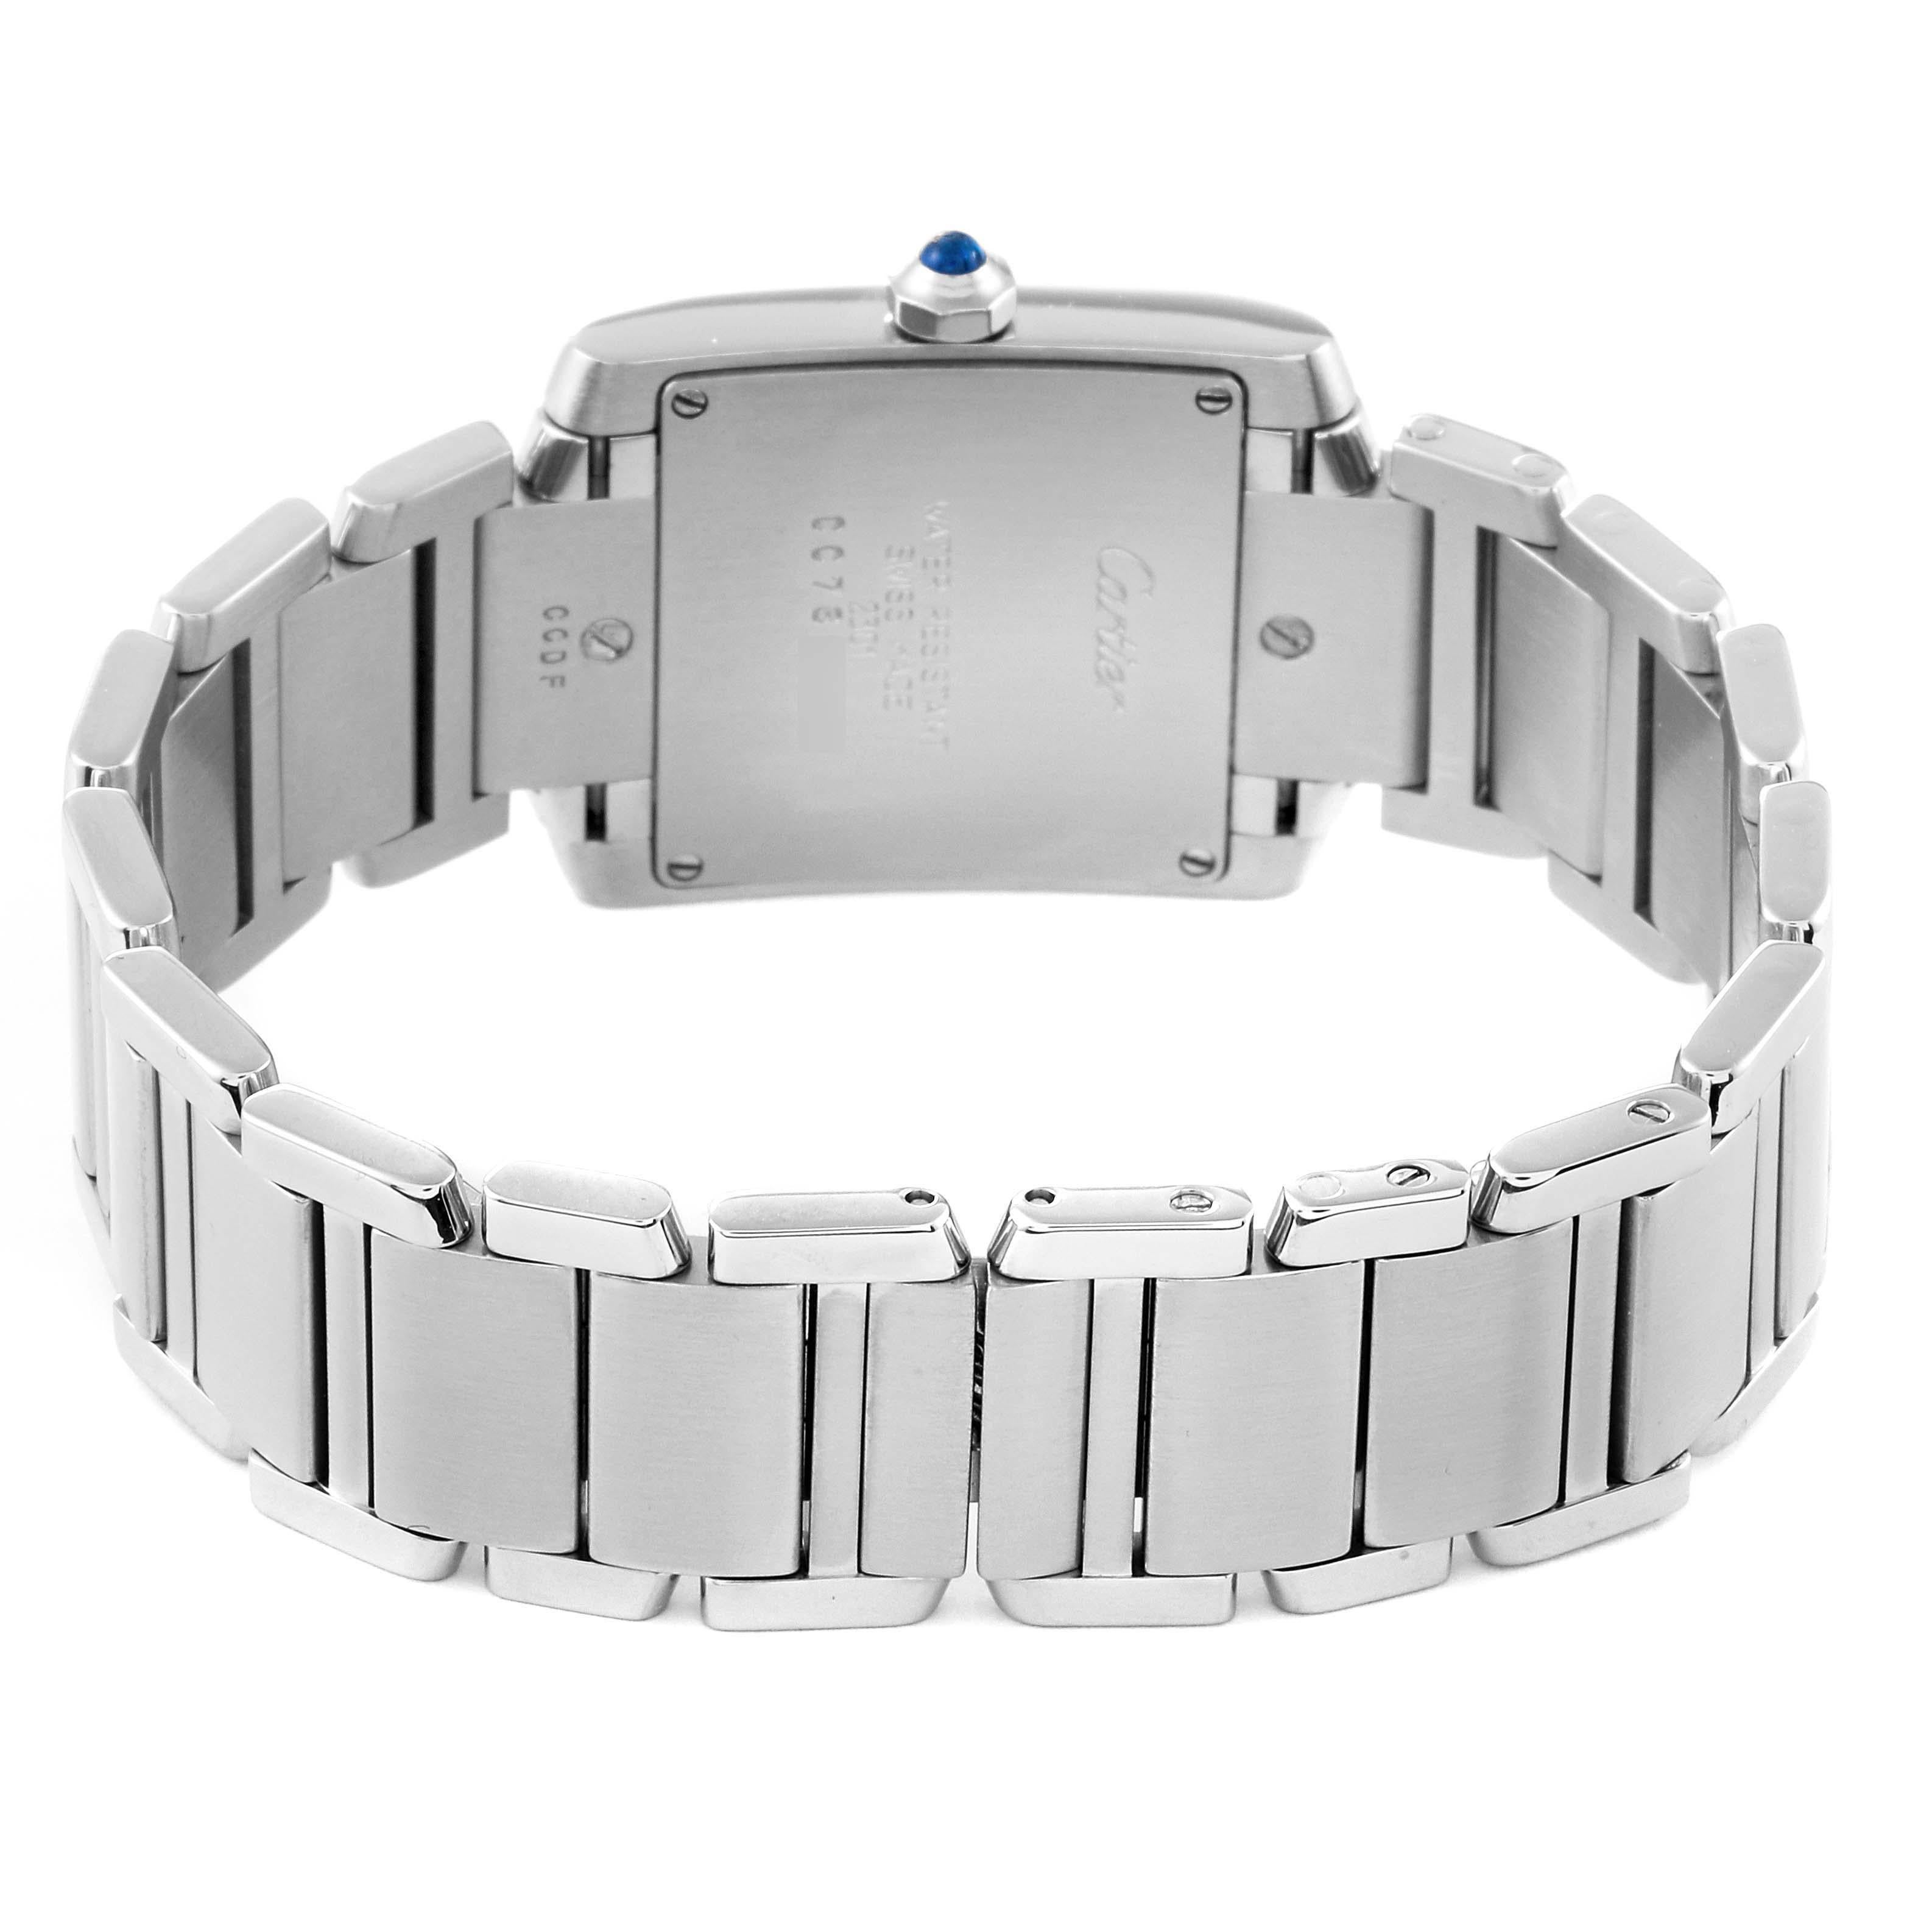 Cartier Tank Francaise Midsize Steel Ladies Watch WSTA0005 For Sale 2